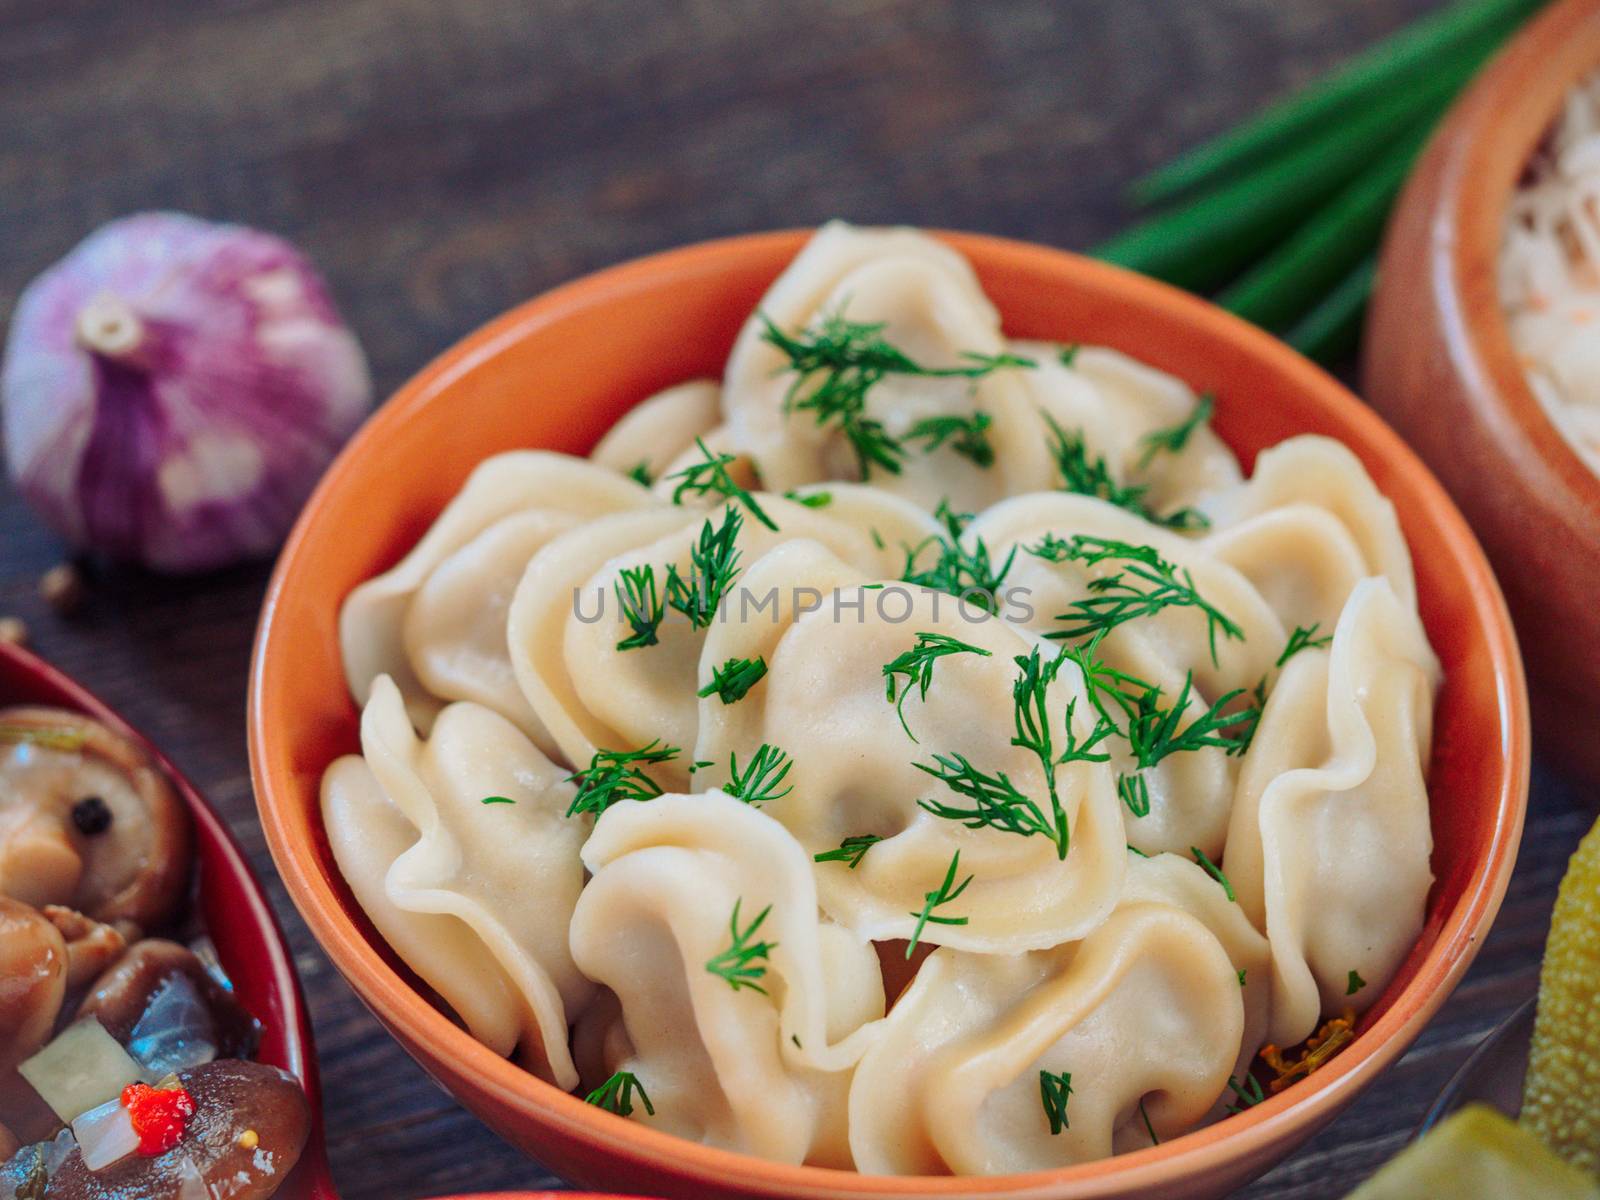 Closeup view of traditional russian food - pelmeni, ravioli or meat dumplings - on brown wooden table. Served with marinated mushrooms, sauerkraut, salted cucumbers, green onion and garlic. Copy space